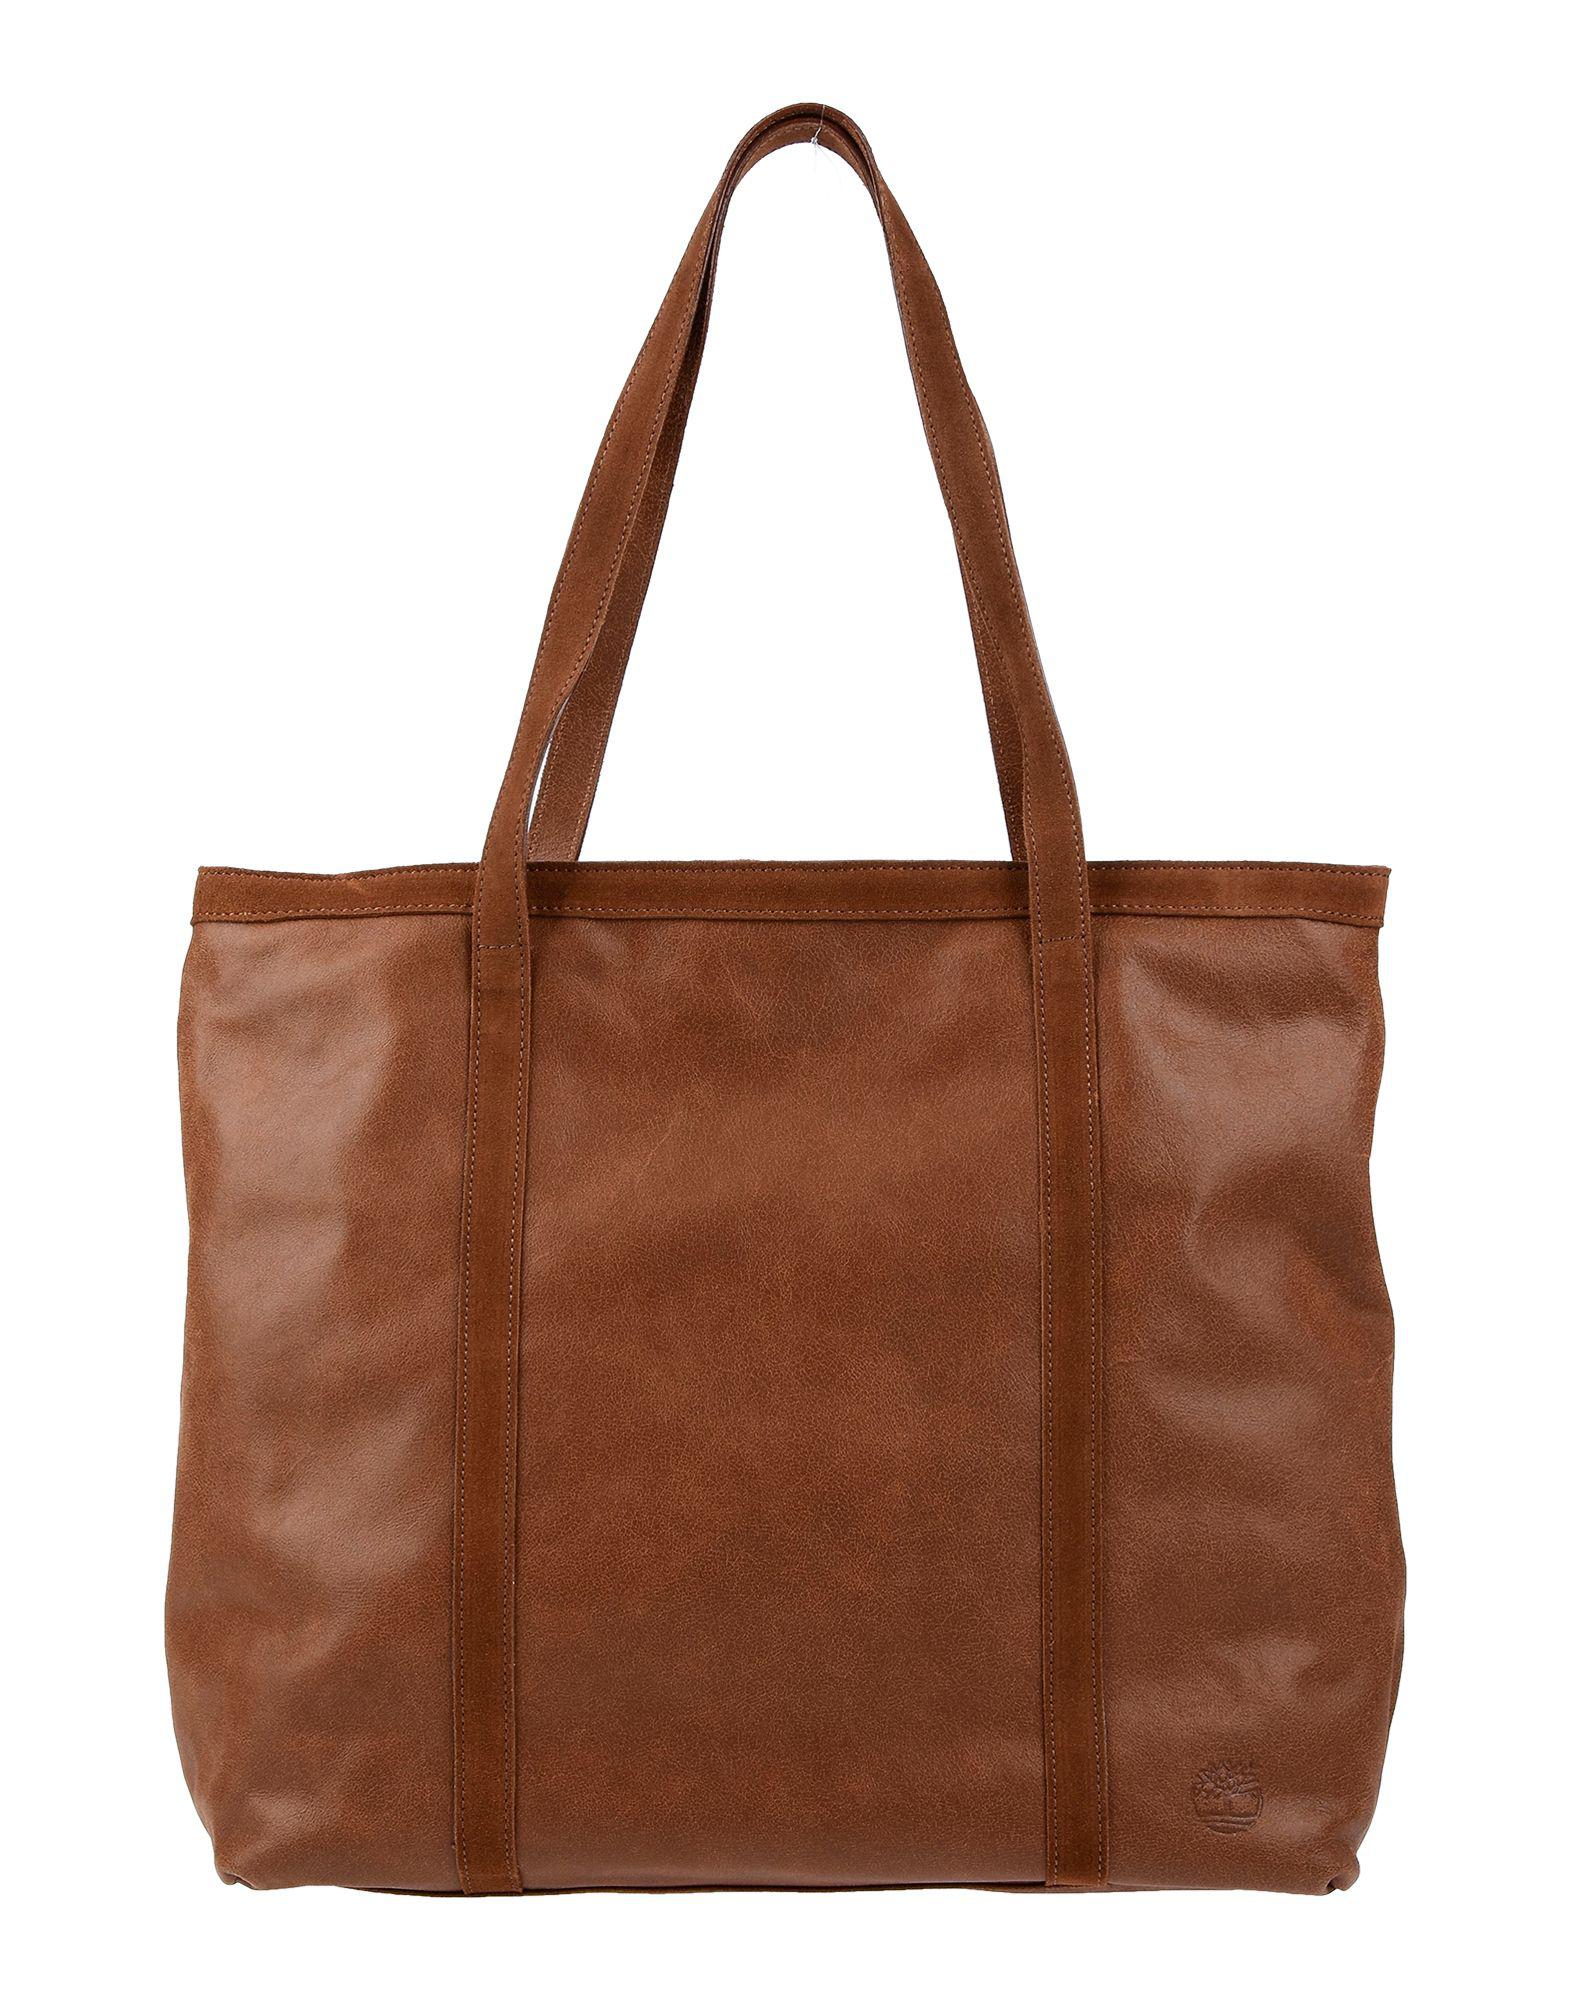 Timberland Leather Shoulder Bag in Brown - Lyst